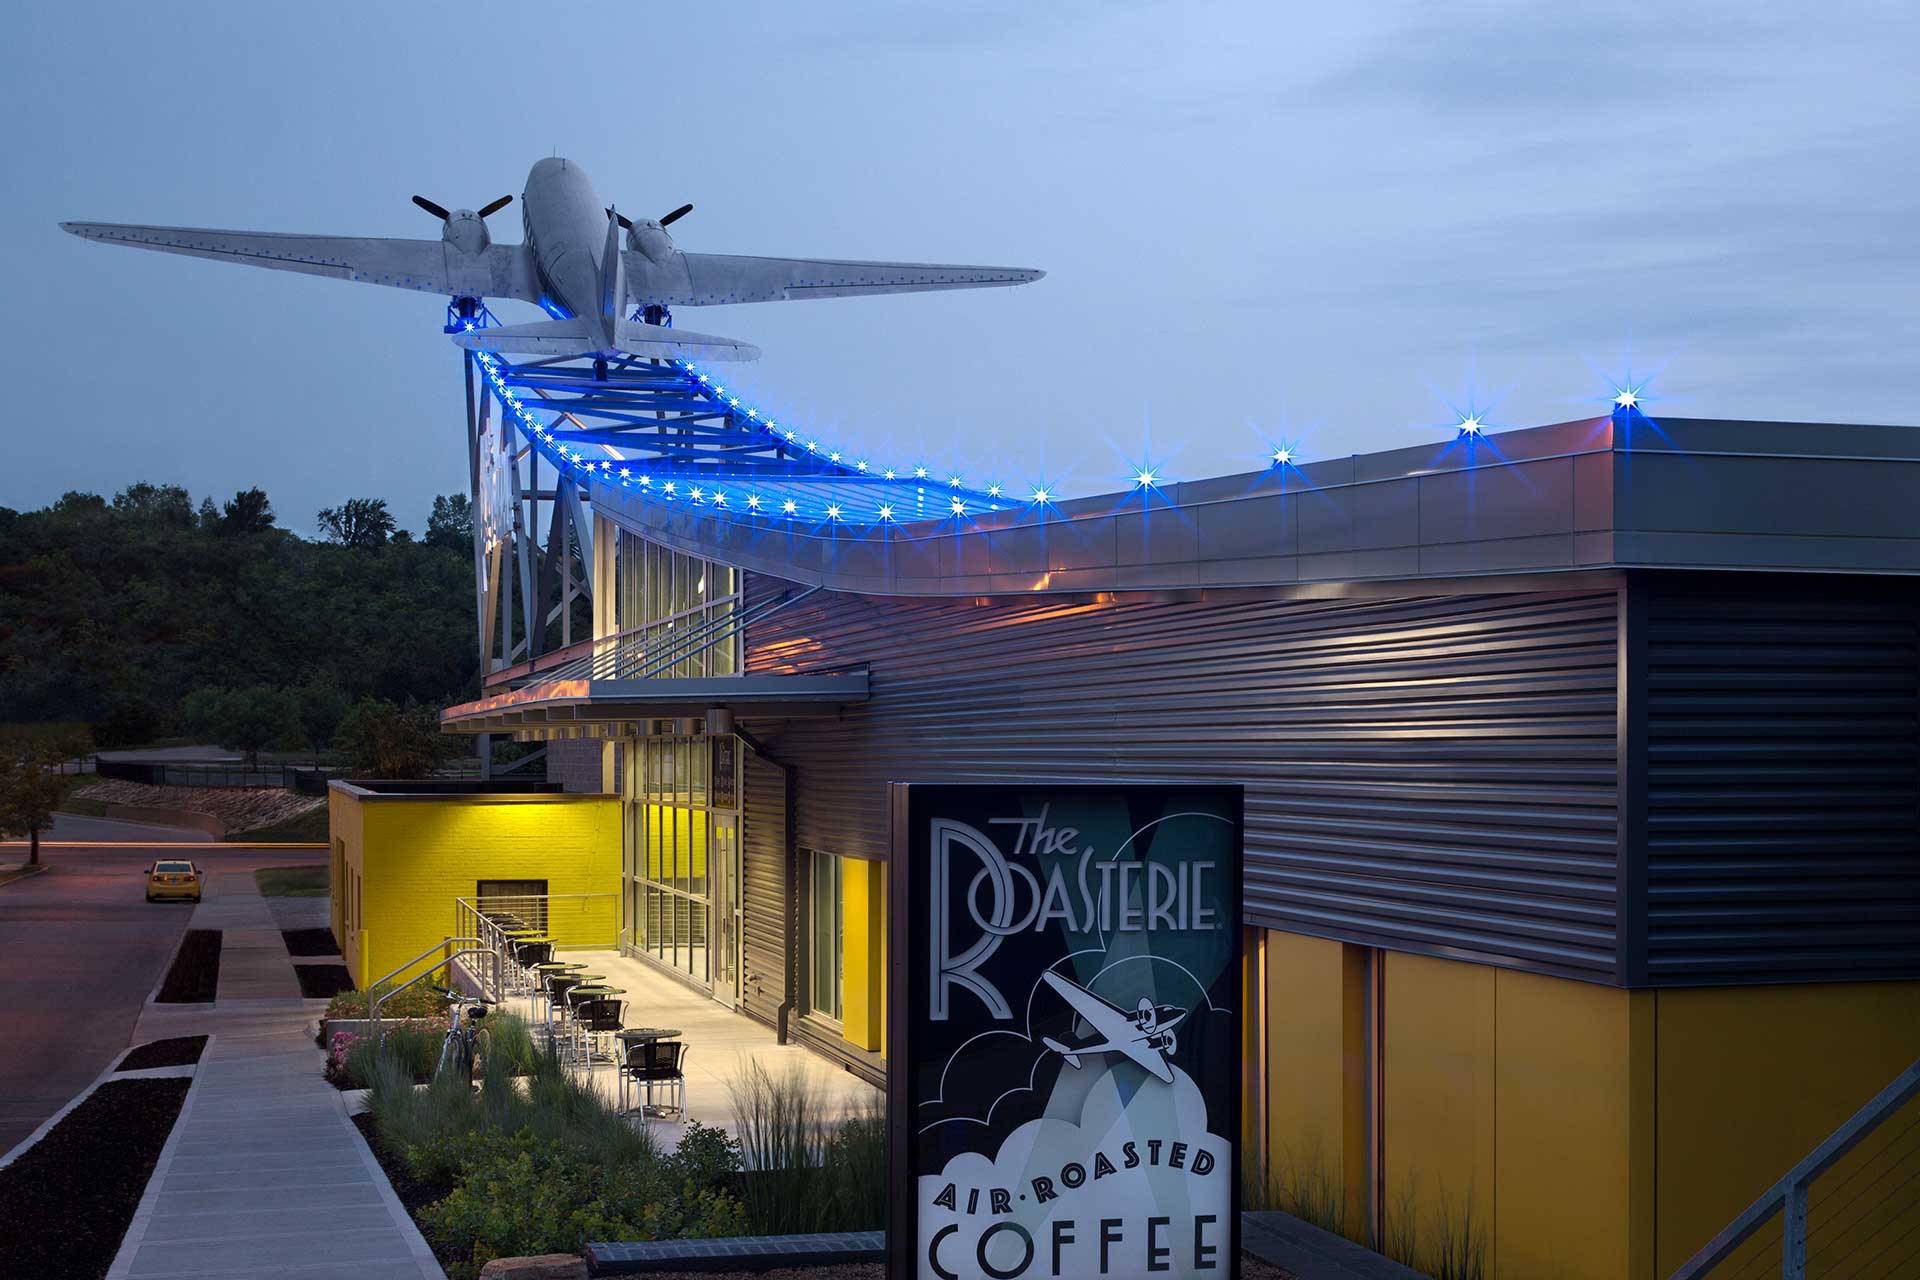 The Roasterie Kansas City factory, with twin-propeller airplane built into design of roof